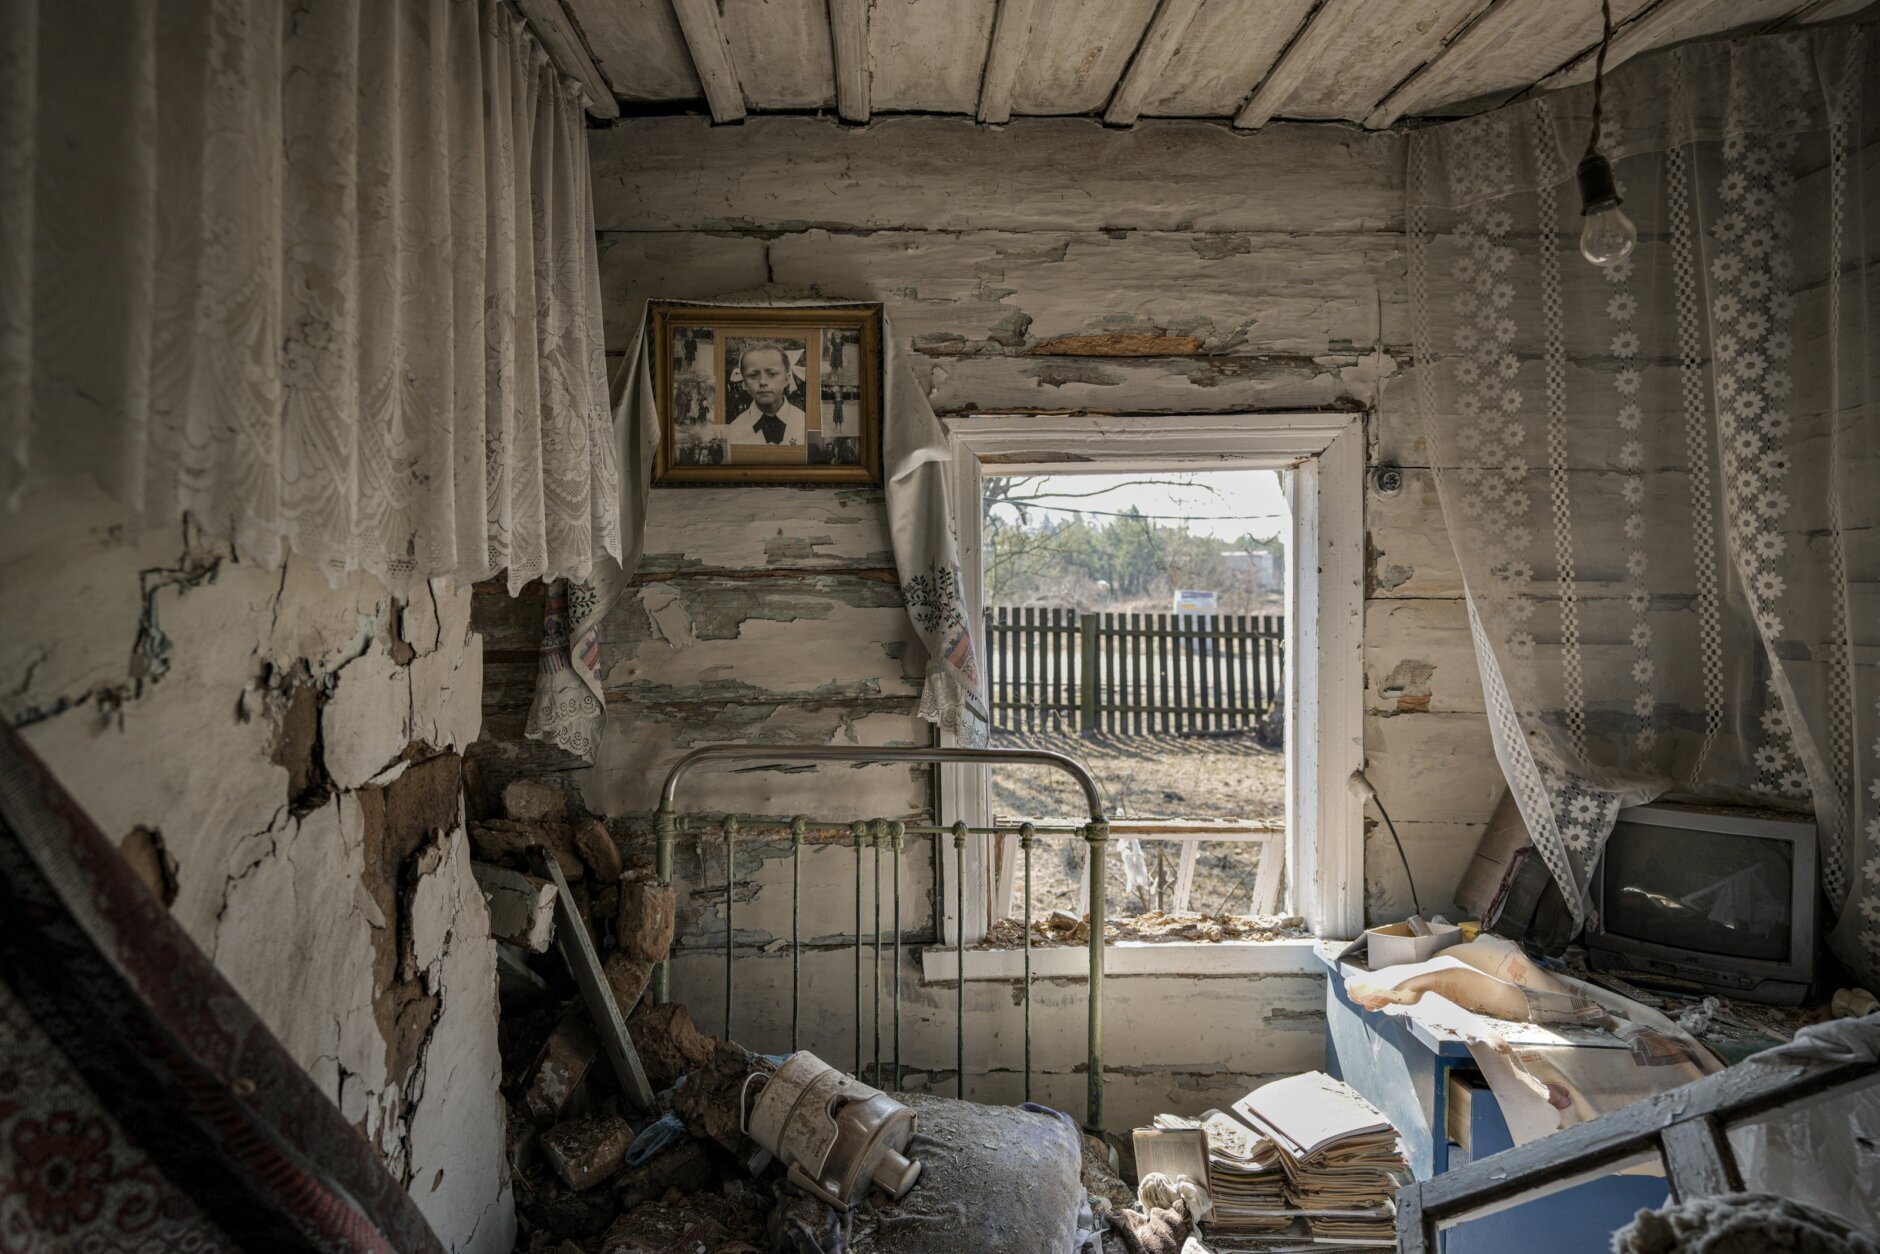 A photograph hangs on a wall inside a house destroyed by fighting between Russian and Ukrainian forces in the village of Yasnohorodka, on the outskirts of Kyiv, Ukraine, Friday, March 25, 2022. With stunning speed, Russia's war in Ukraine is driving Western Europe into the outstretched arms of the United States again, and the embrace was especially apparent when President Joe Biden offered a major expansion of natural gas shipments to his European Union counterpart Friday. (AP Photo/Vadim Ghirda)